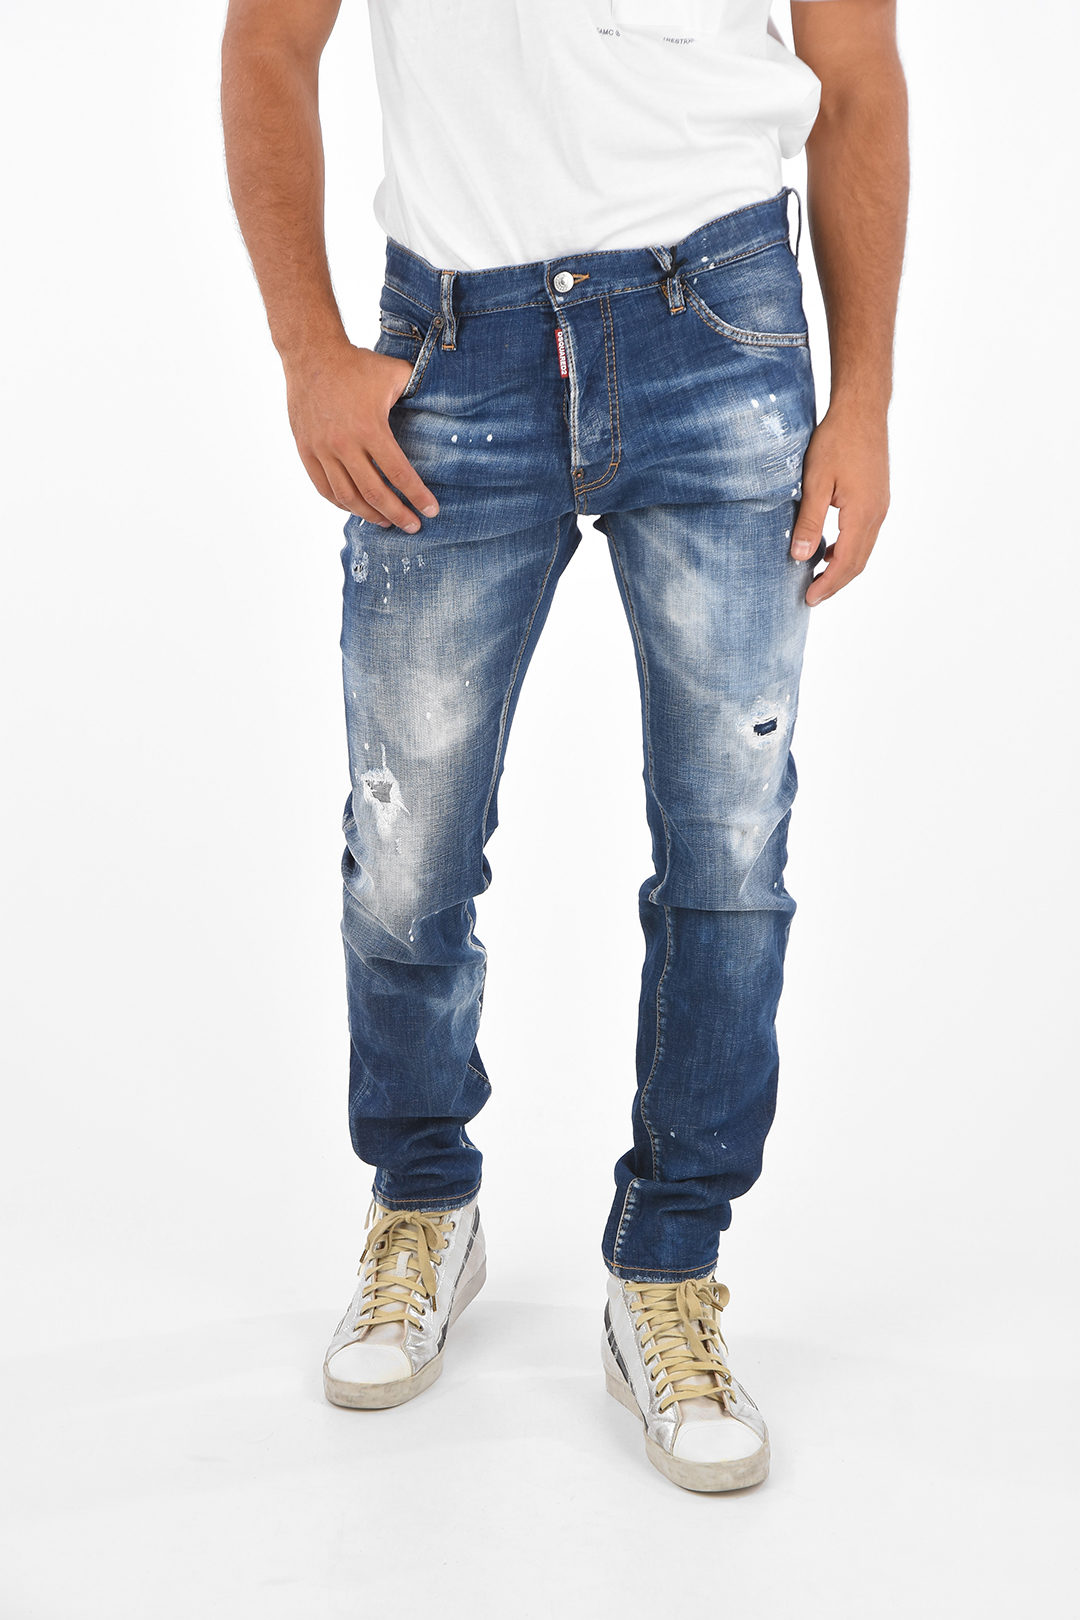 washed-out-cool-guy-fit-jeans-17-cm_1017880_zoom.jpg